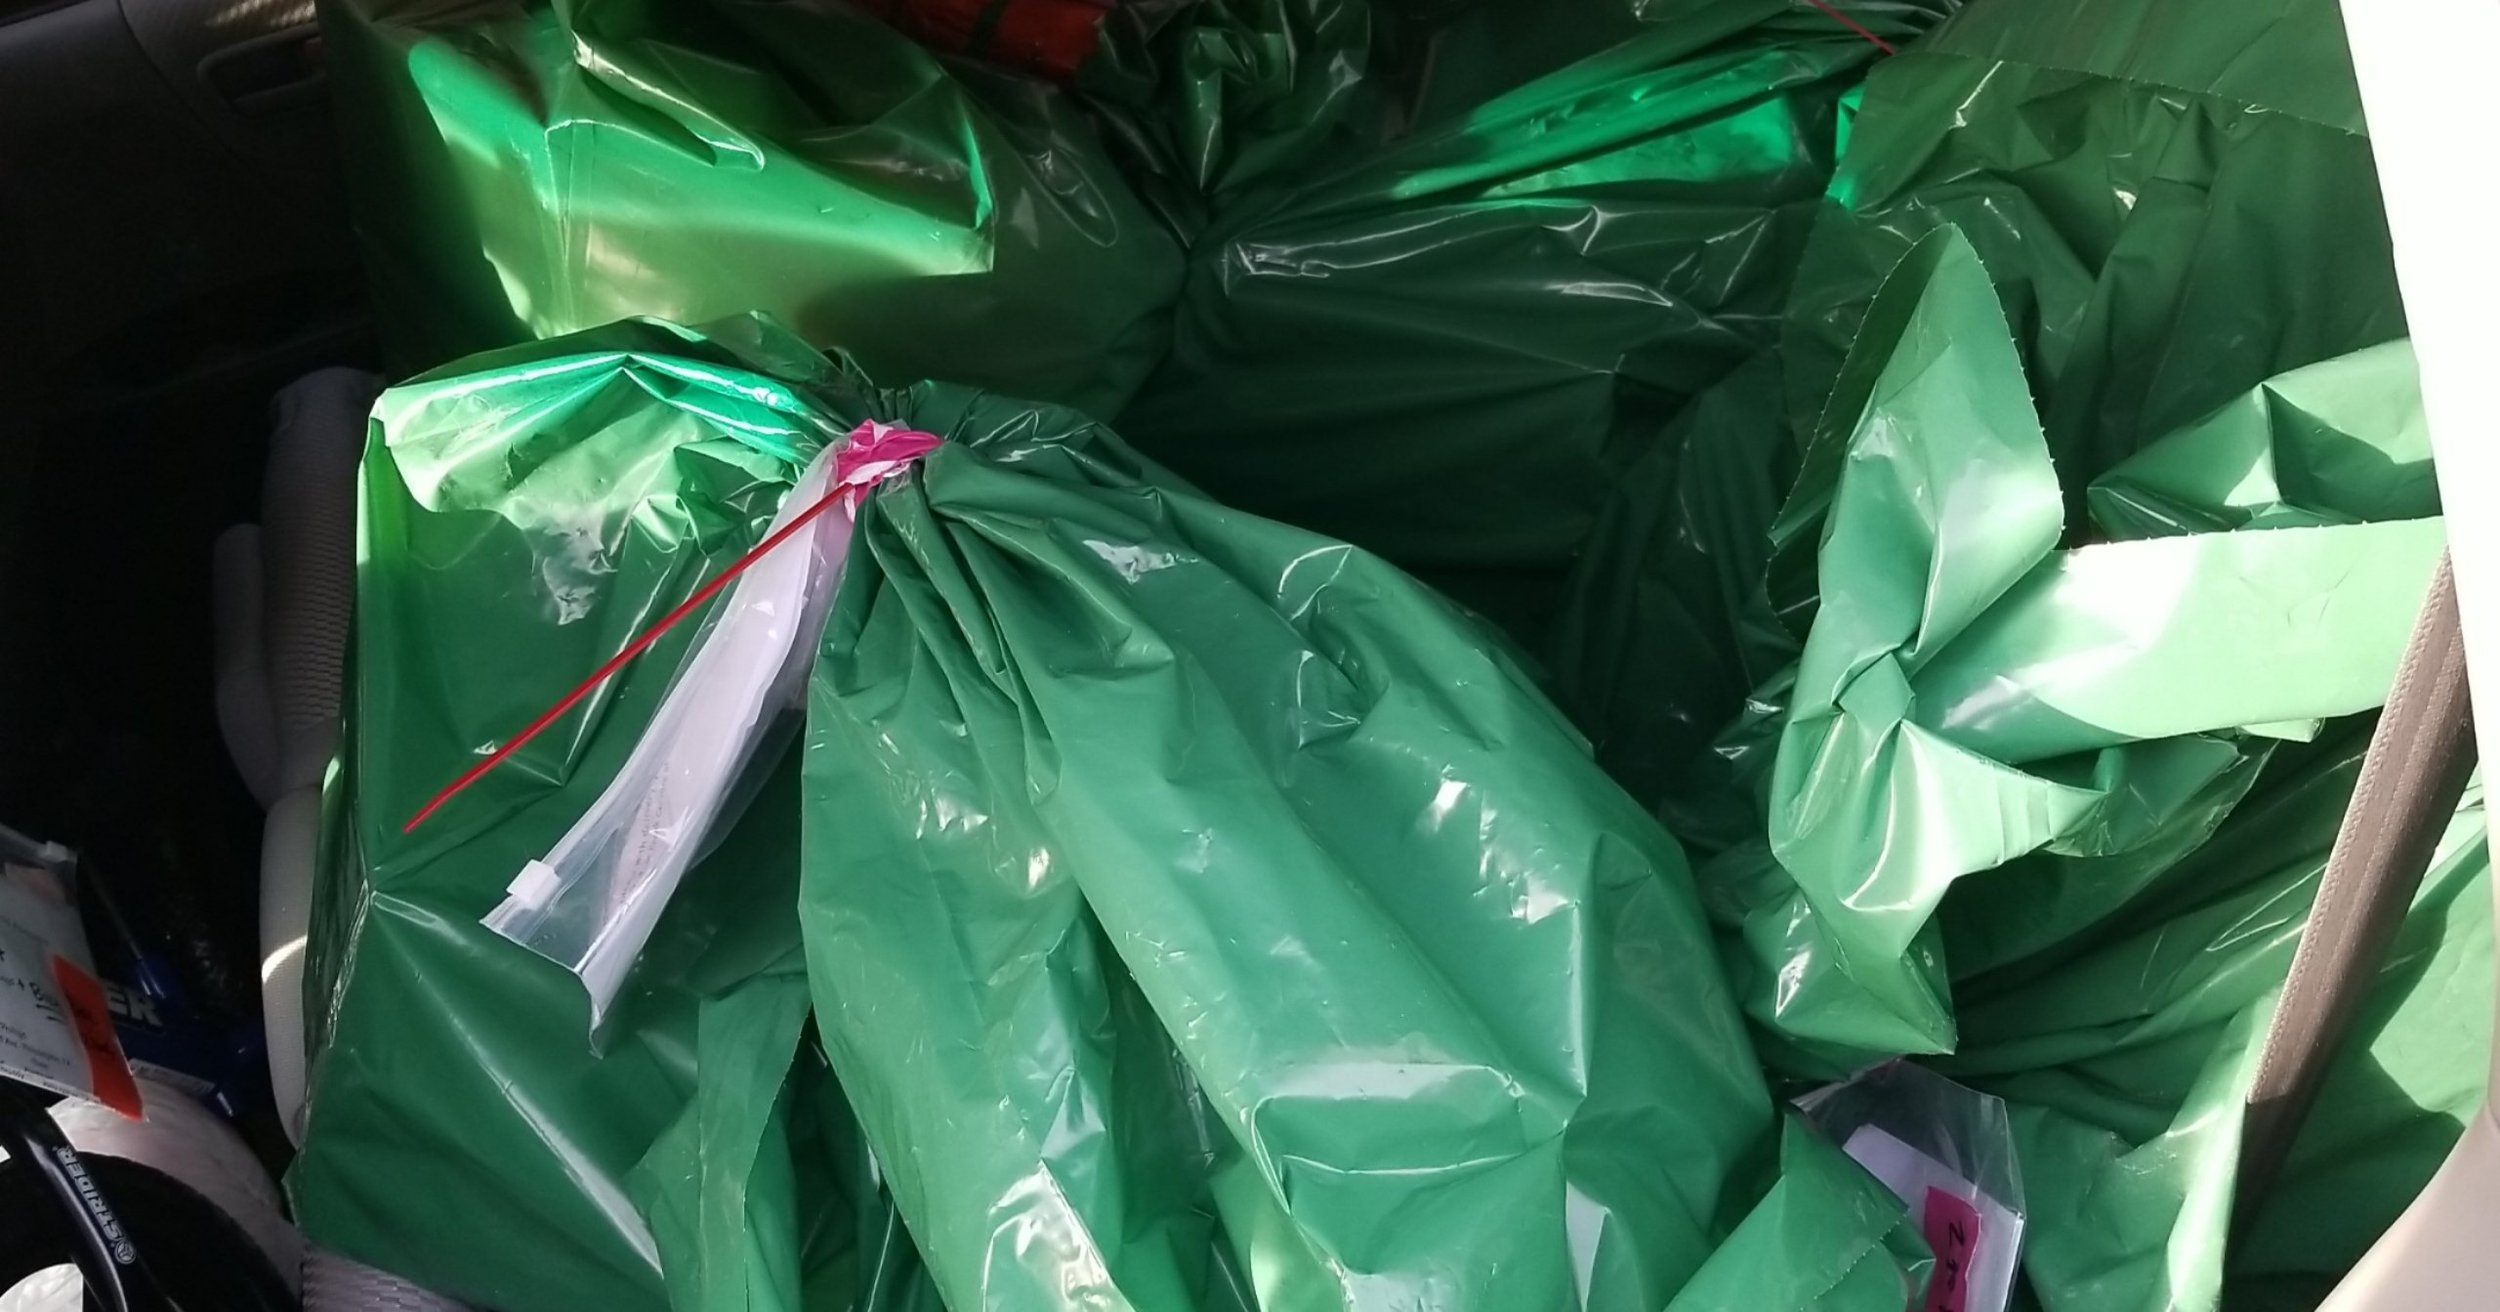  Bagged and sorted toys for the Support Center for Child Advocates Holiday Toy Drive in the car on their way to being delivered to deserving families of underprivileged, abused, and neglected kids all around Philadelphia. 